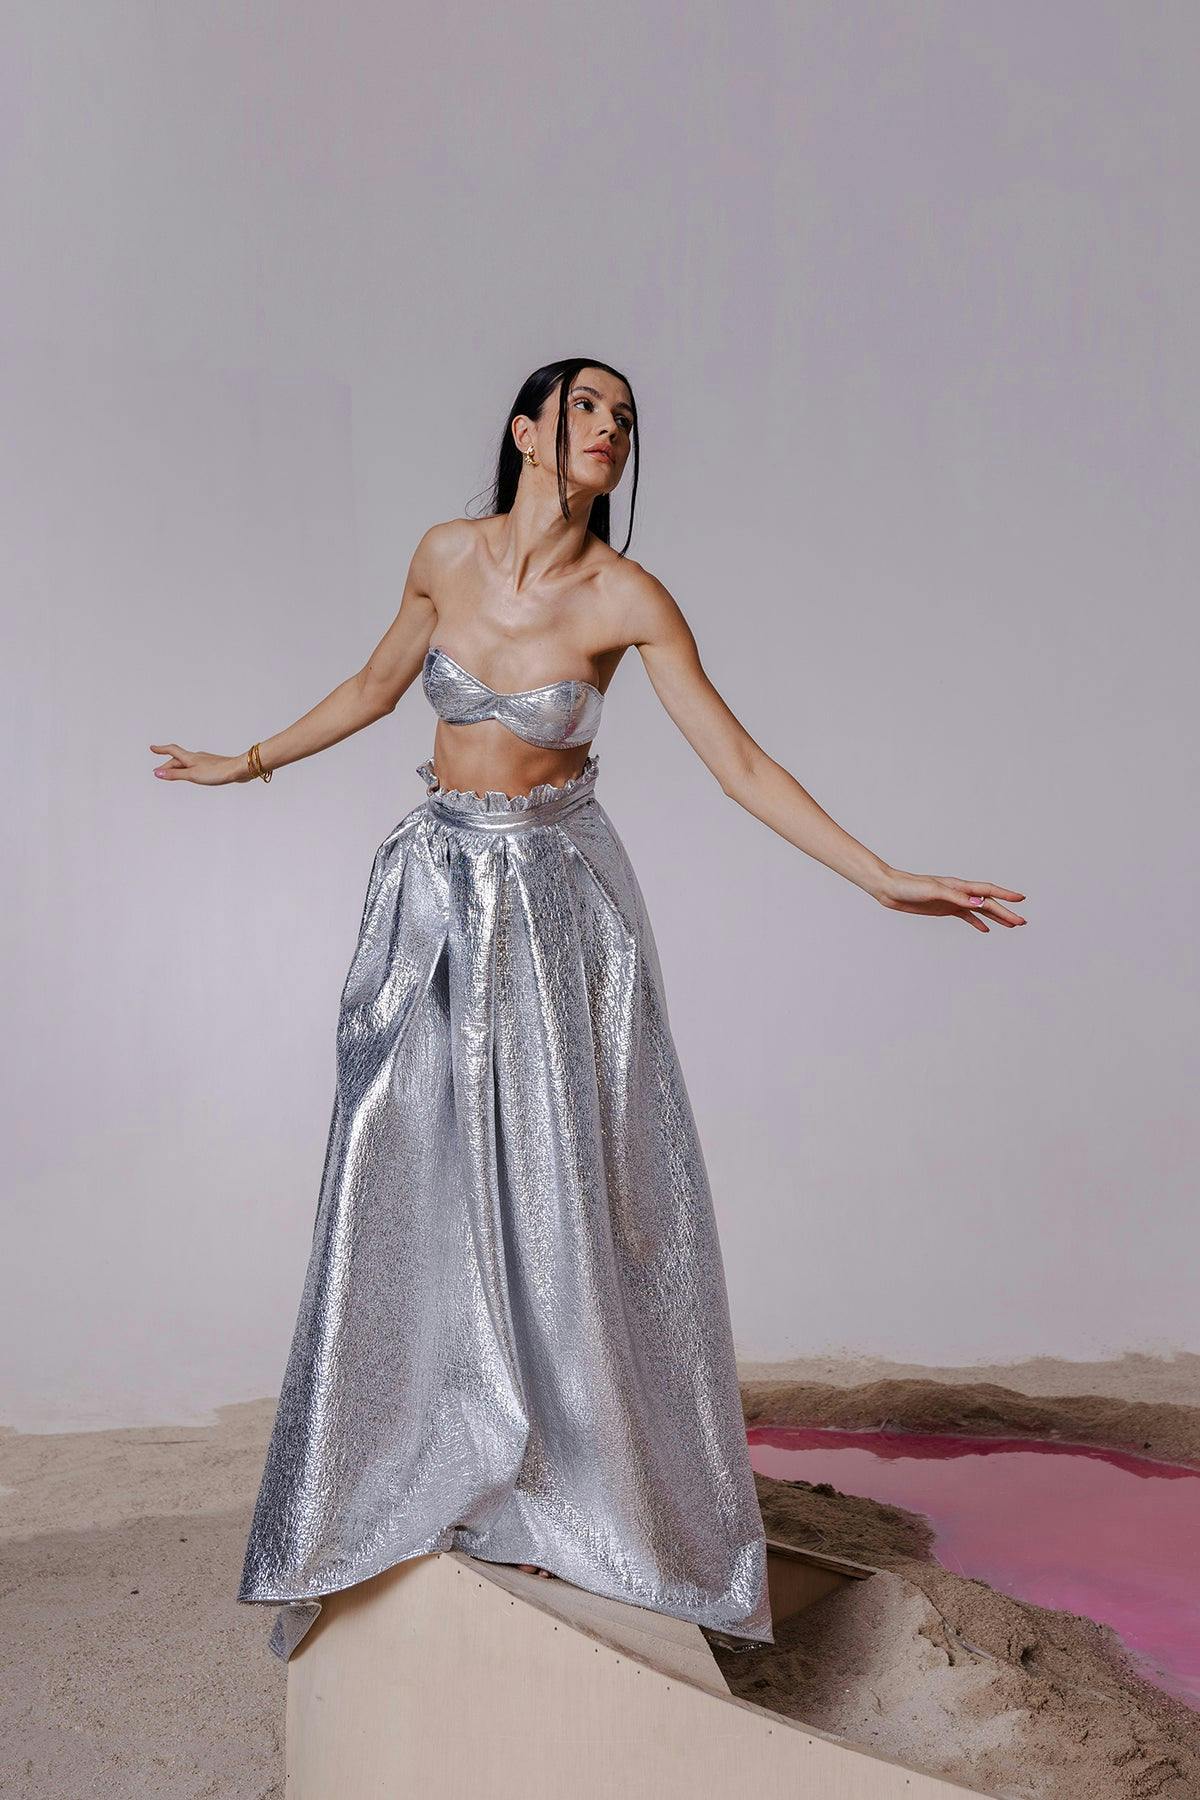 LUCIA METALLIC BRALETTE & LONG SKIRT, a product by July Issue